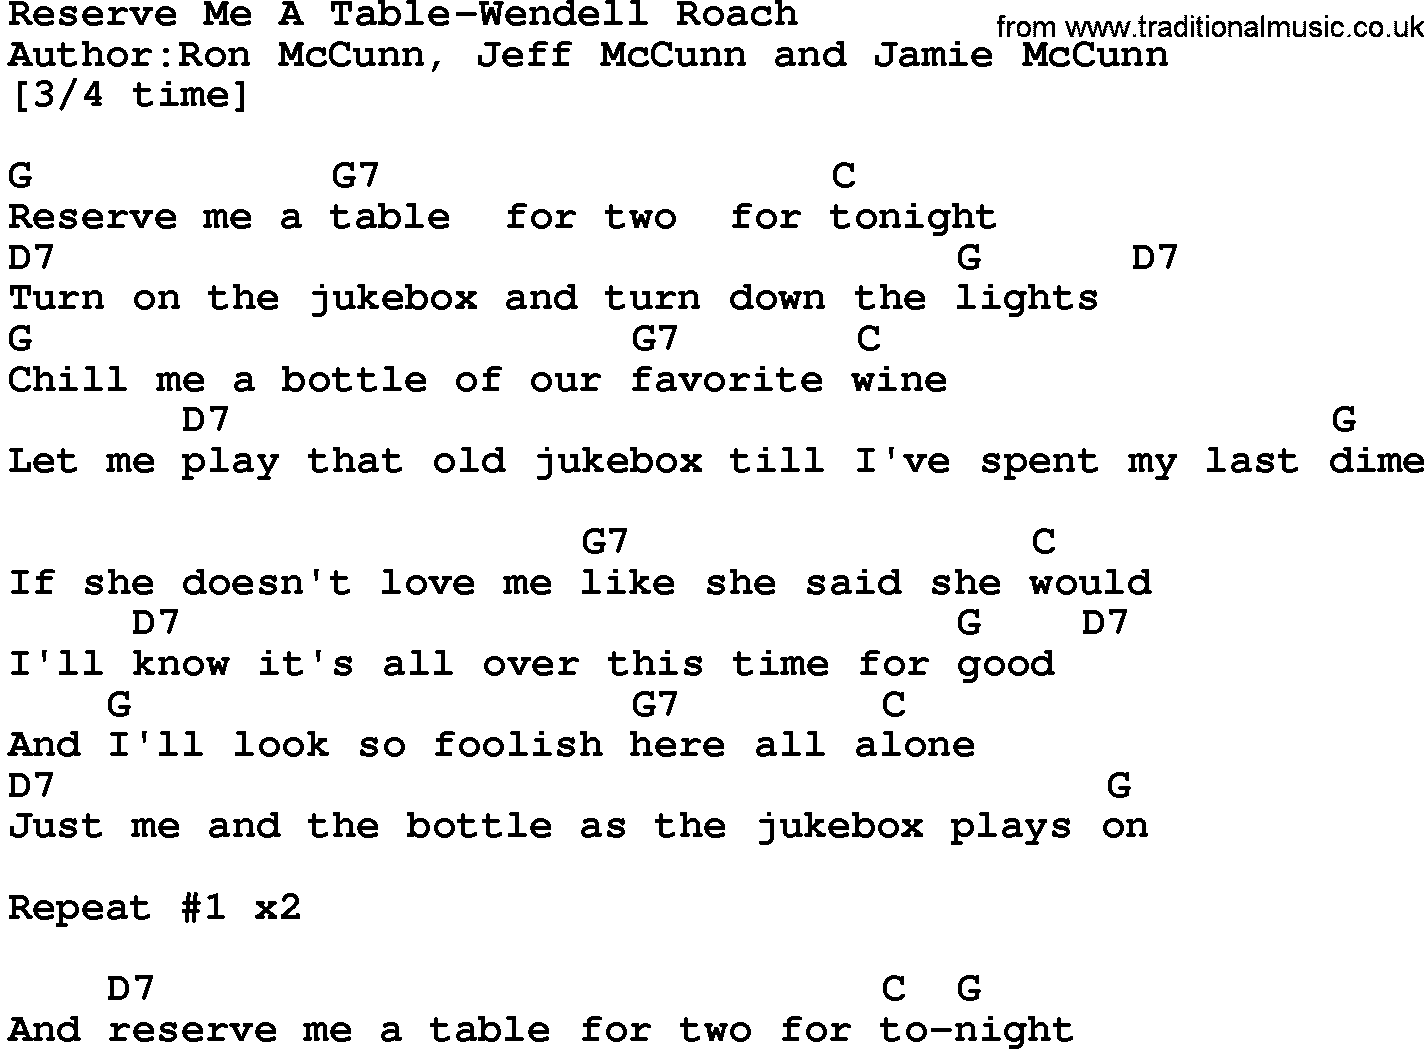 Country music song: Reserve Me A Table-Wendell Roach lyrics and chords